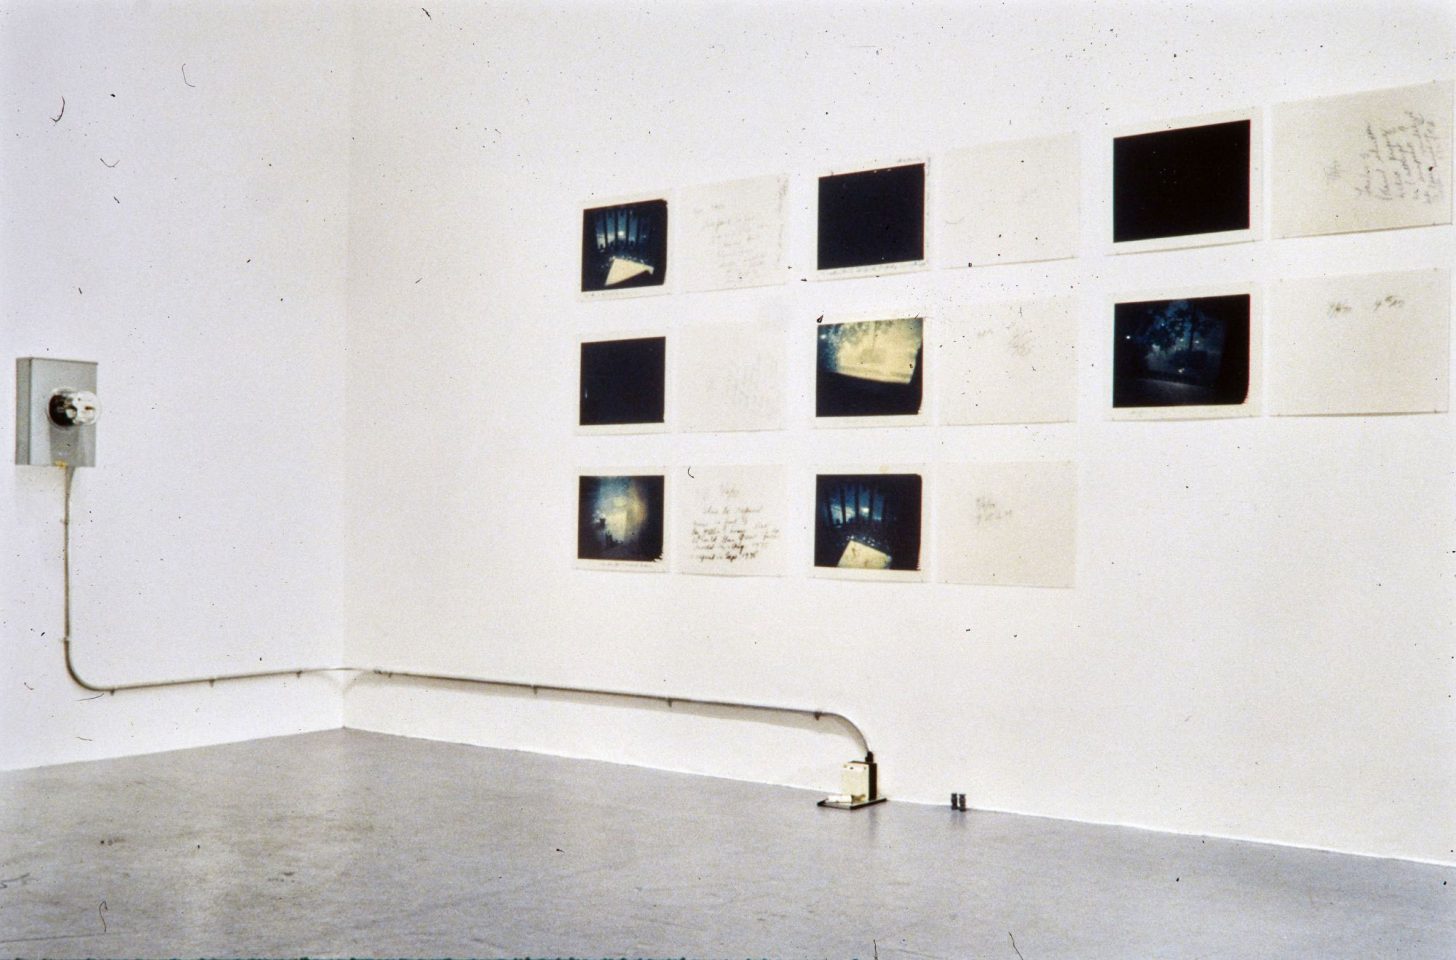 Installation view from Ann-Sofi Siden&#8217;s Who is invading my privacy, not so quietly and not so friendly.
